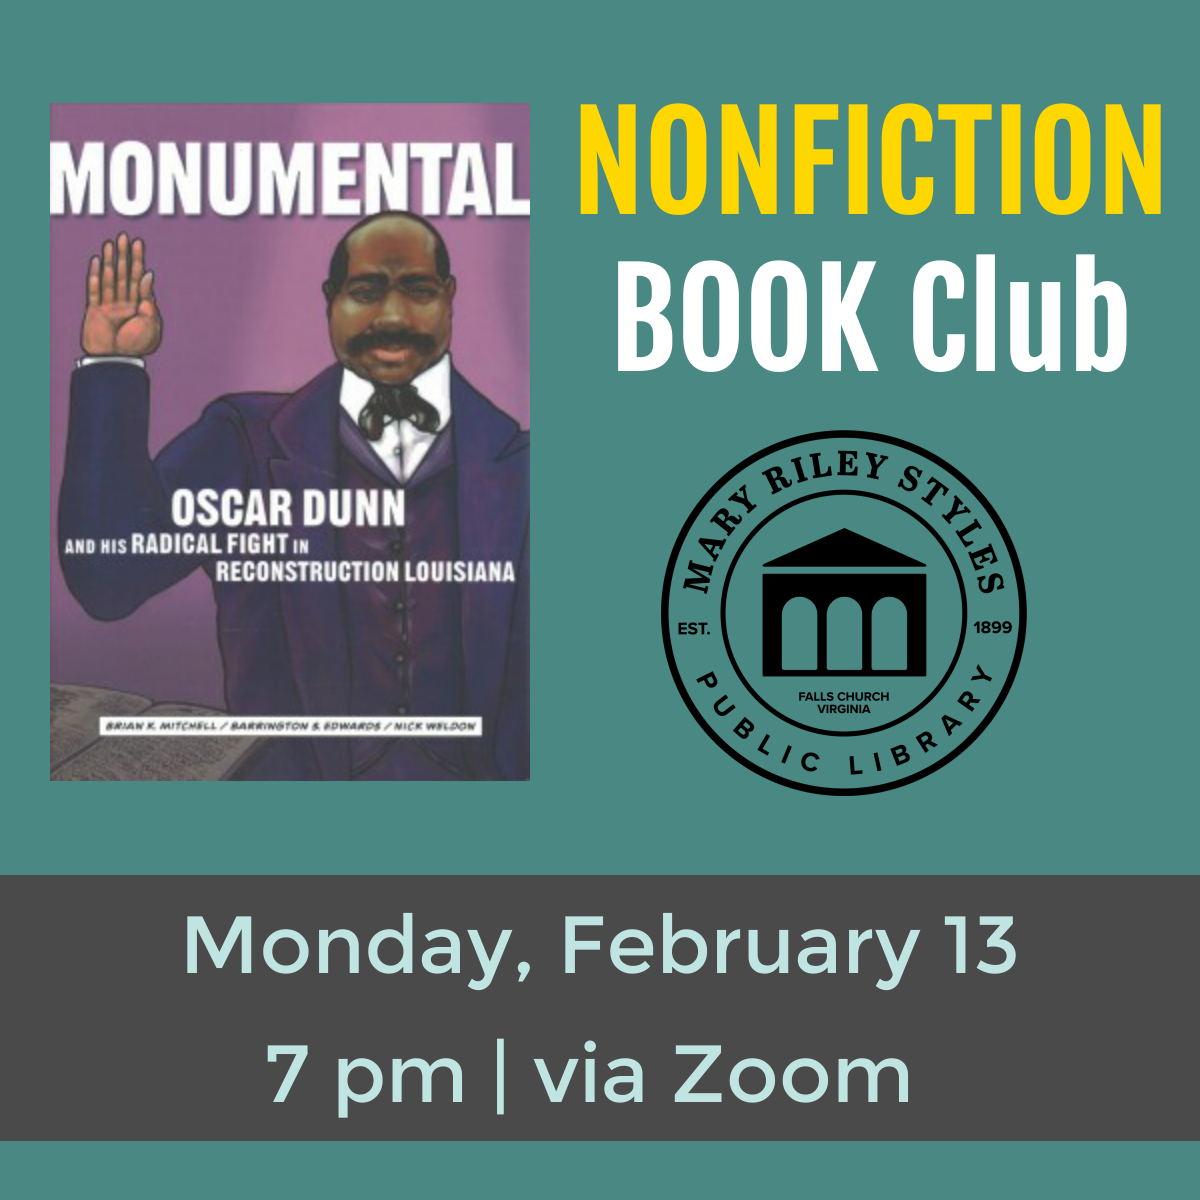 Nonfiction Book Club Monday February 13 at 7 pm via Zoom Monumental